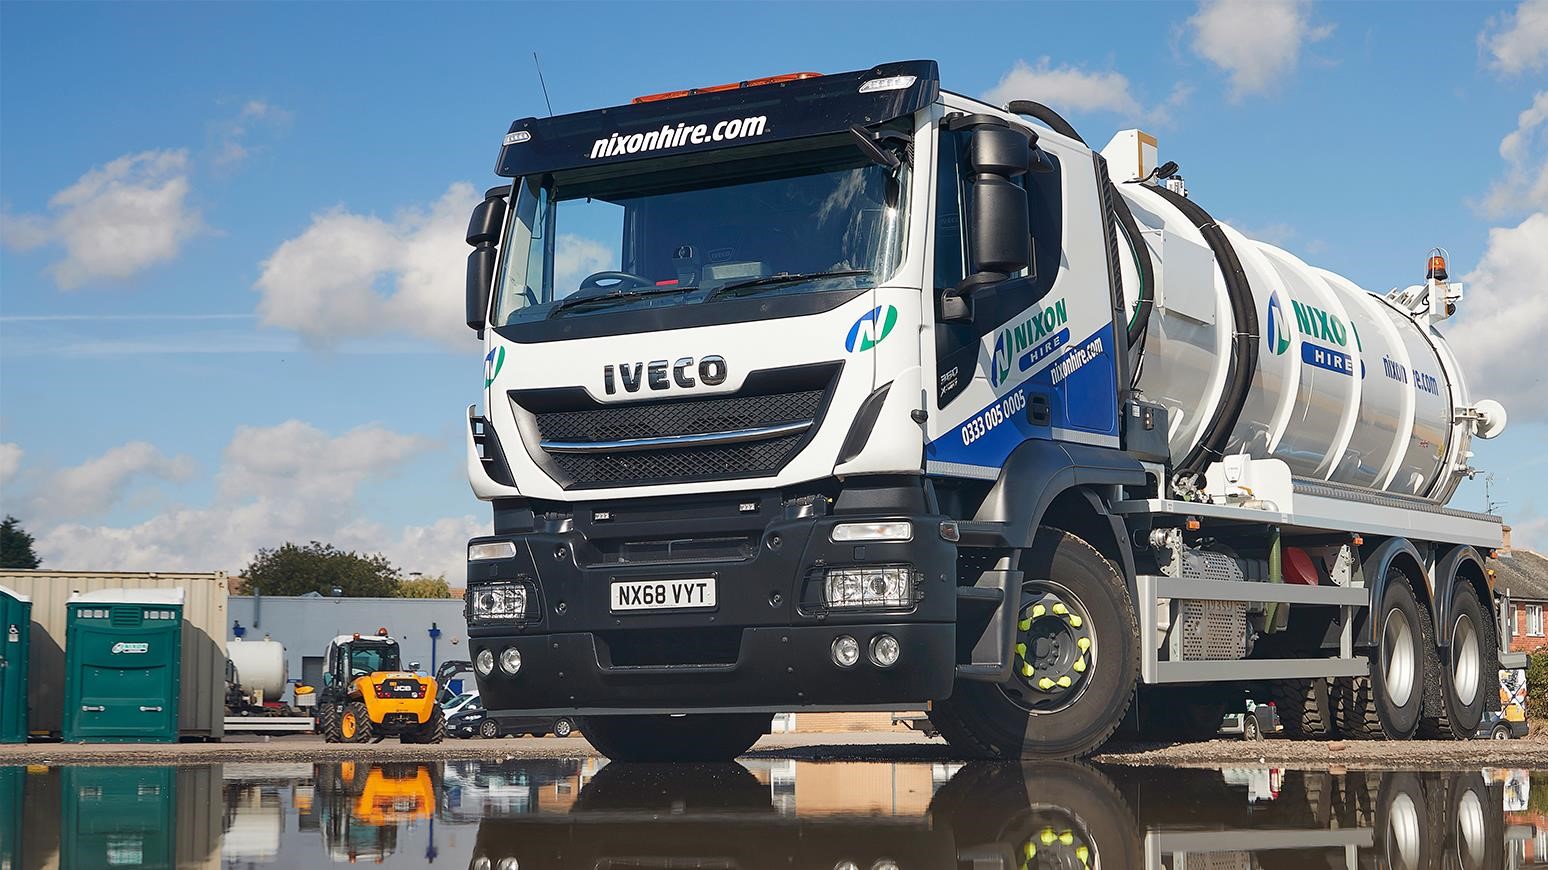 Nixon Hire Selects IVECO Stralis For New Tankers